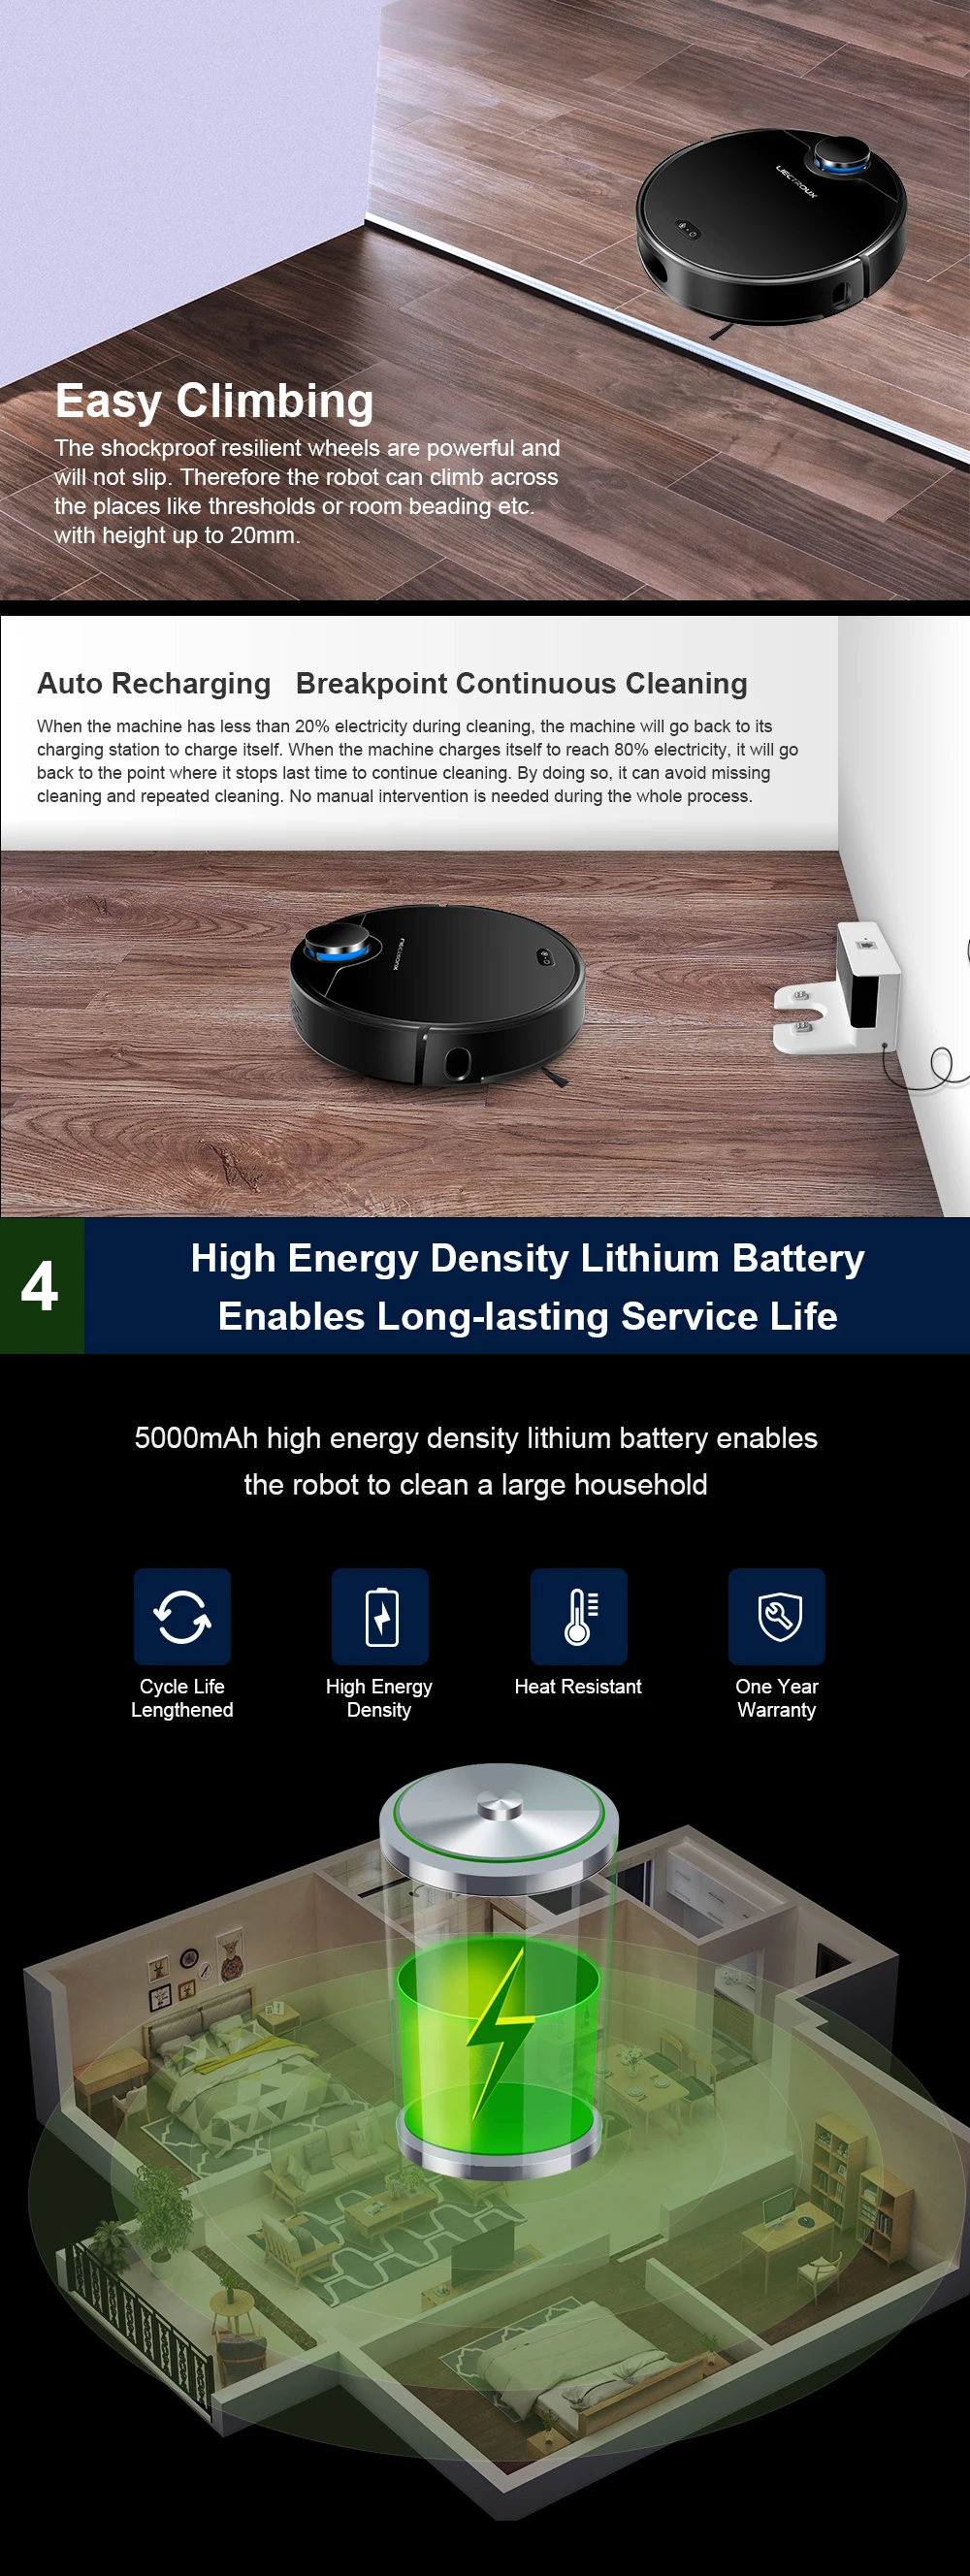 Liectroux ZK901 Tuya App Breakpoint Continuous Cleaning Laser Vacuum Cleaning Works with Alexa and Google Assistant